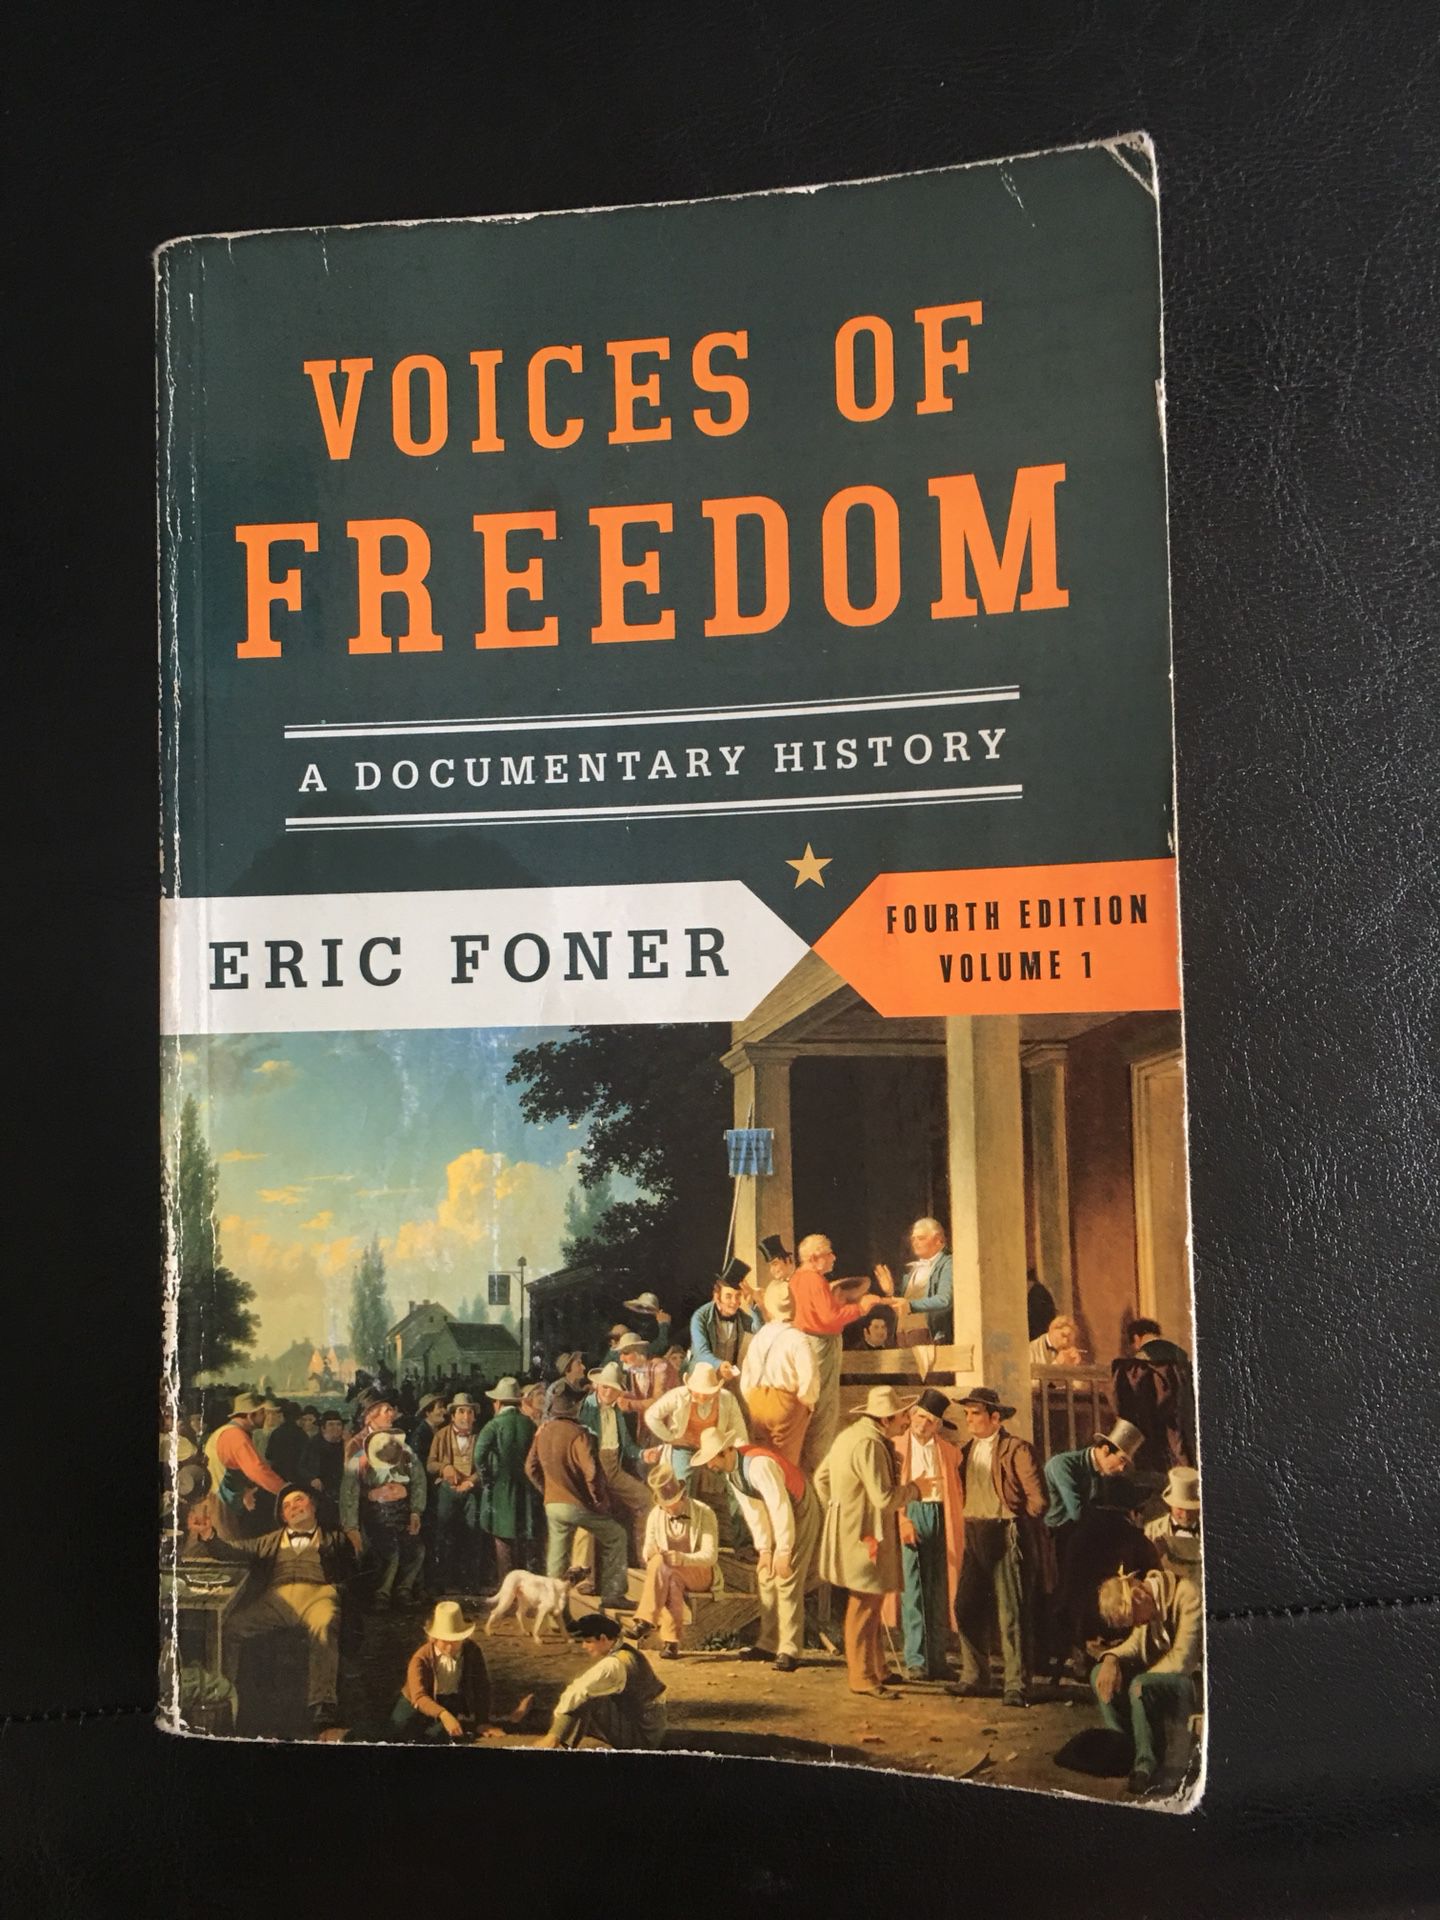 Voices of freedom 4th edition by Eric Foner